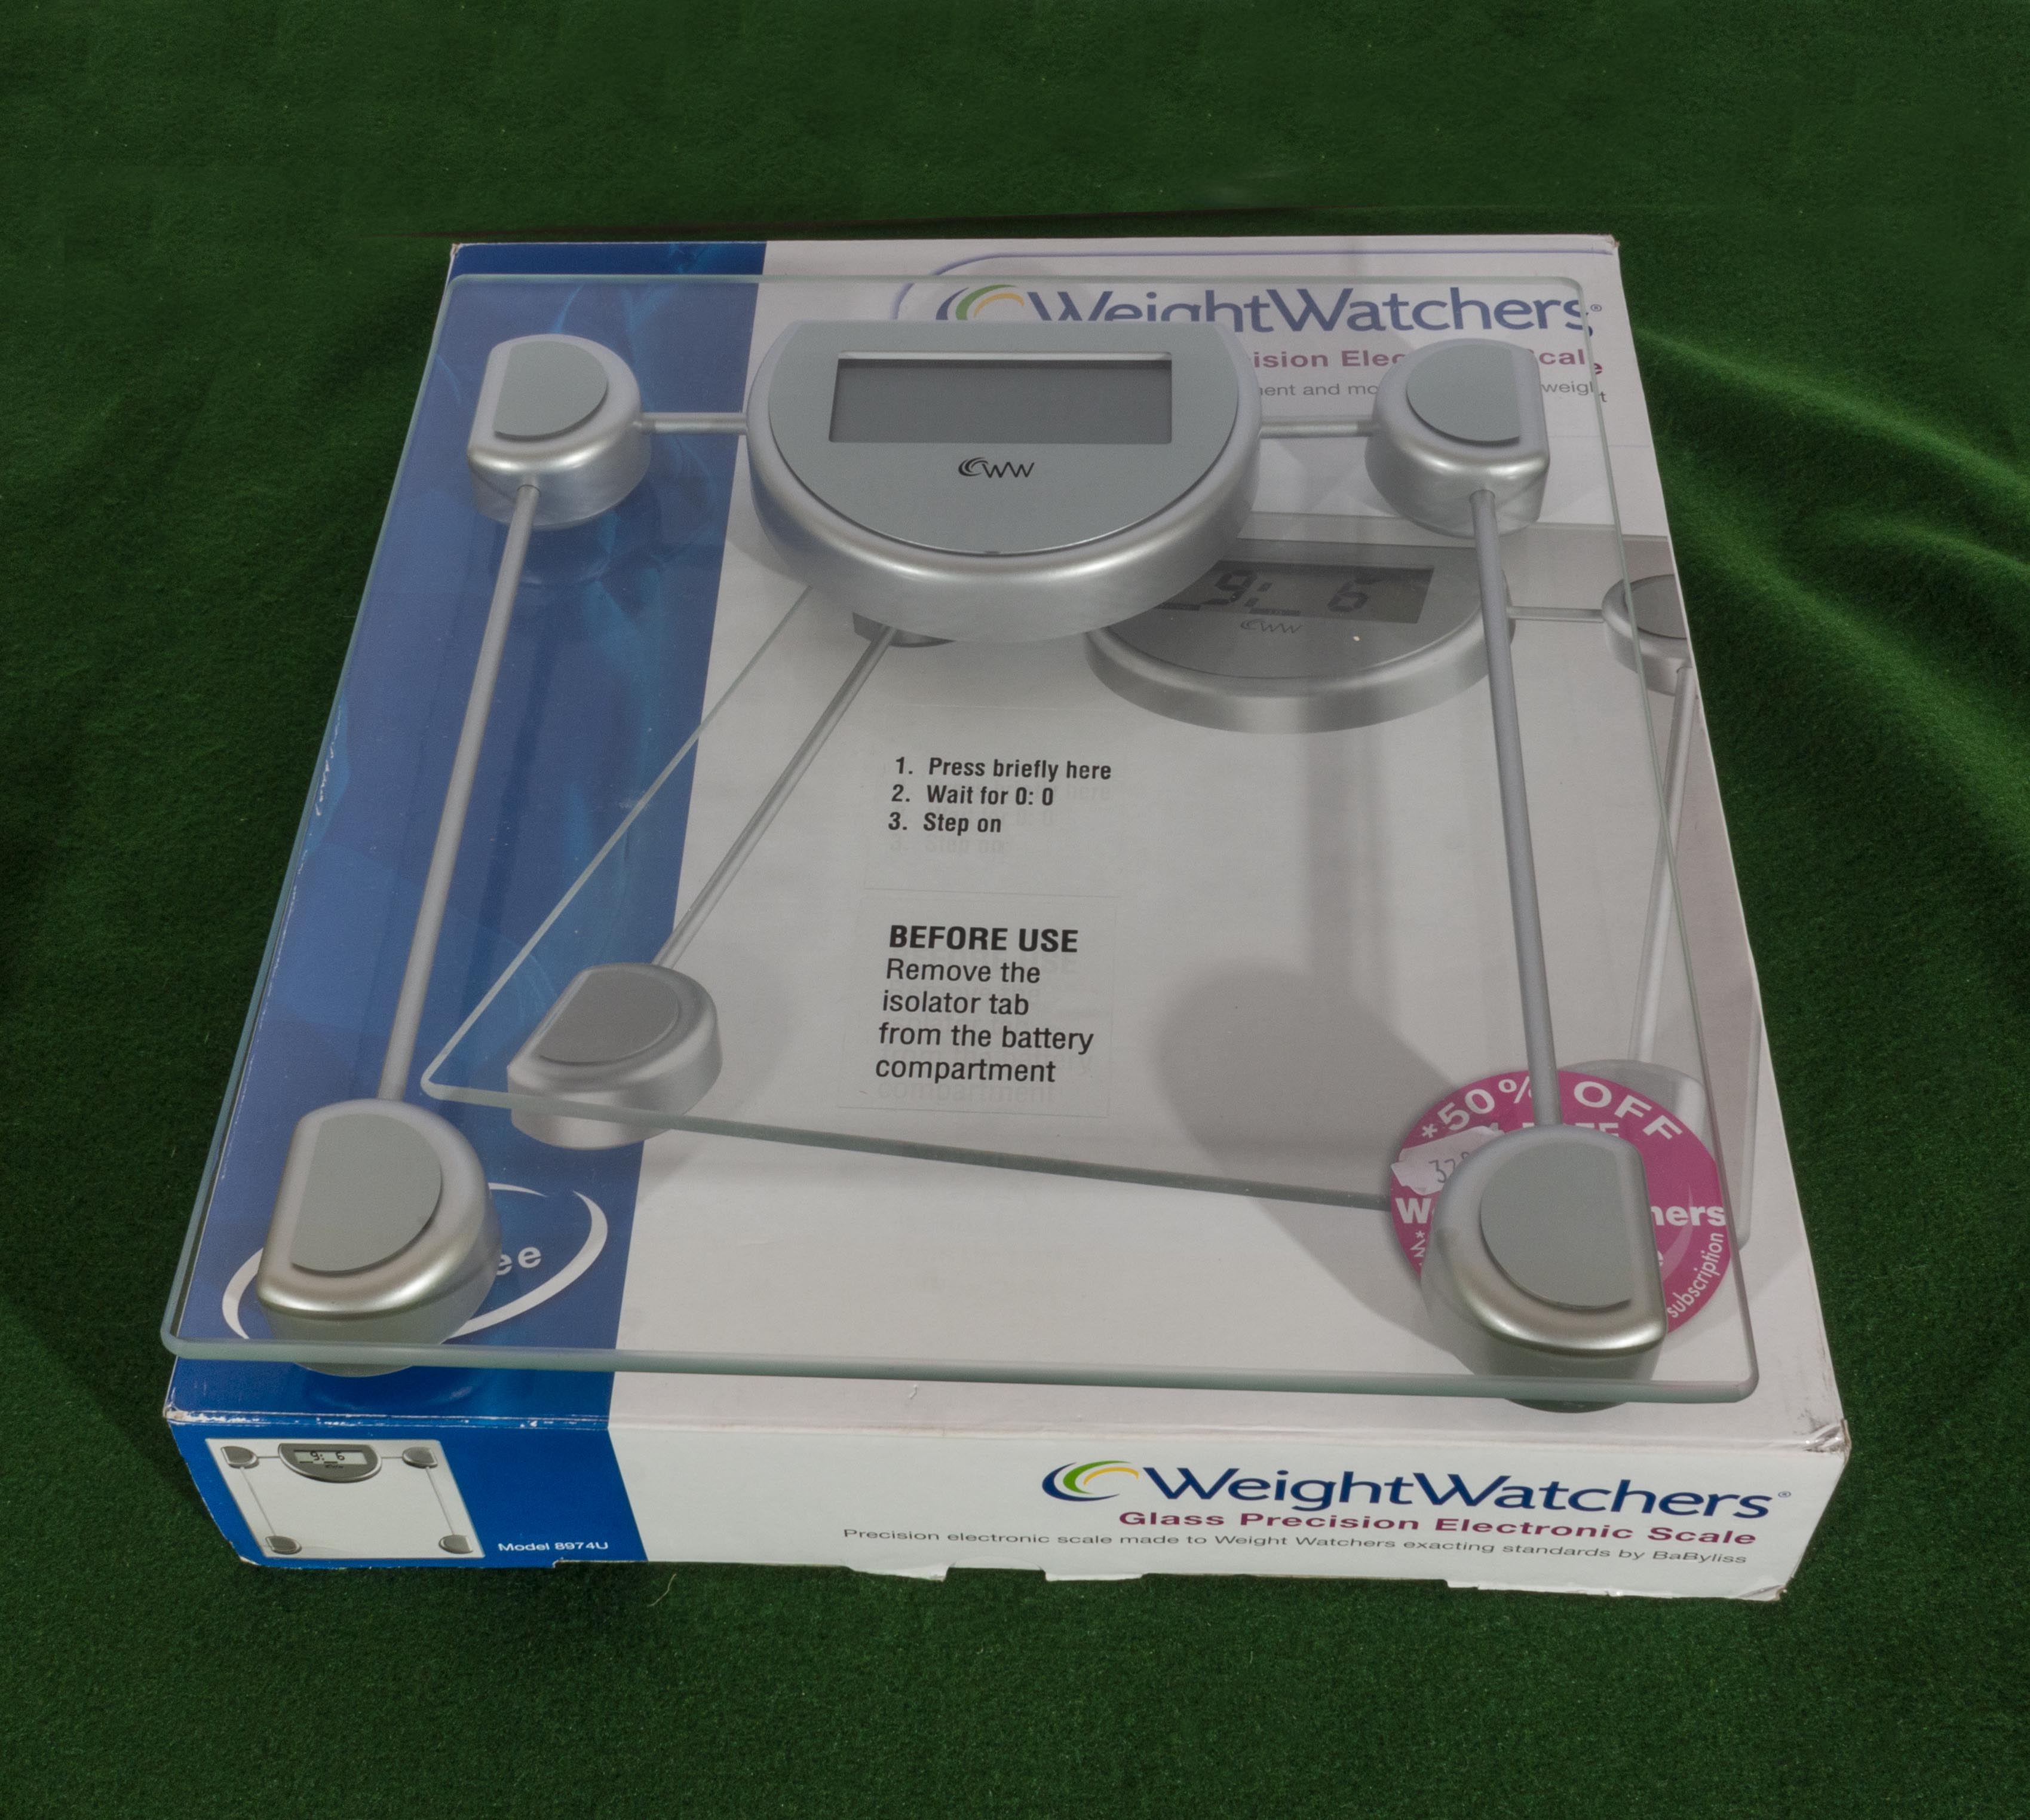 A set of Weight Watchers digital scales